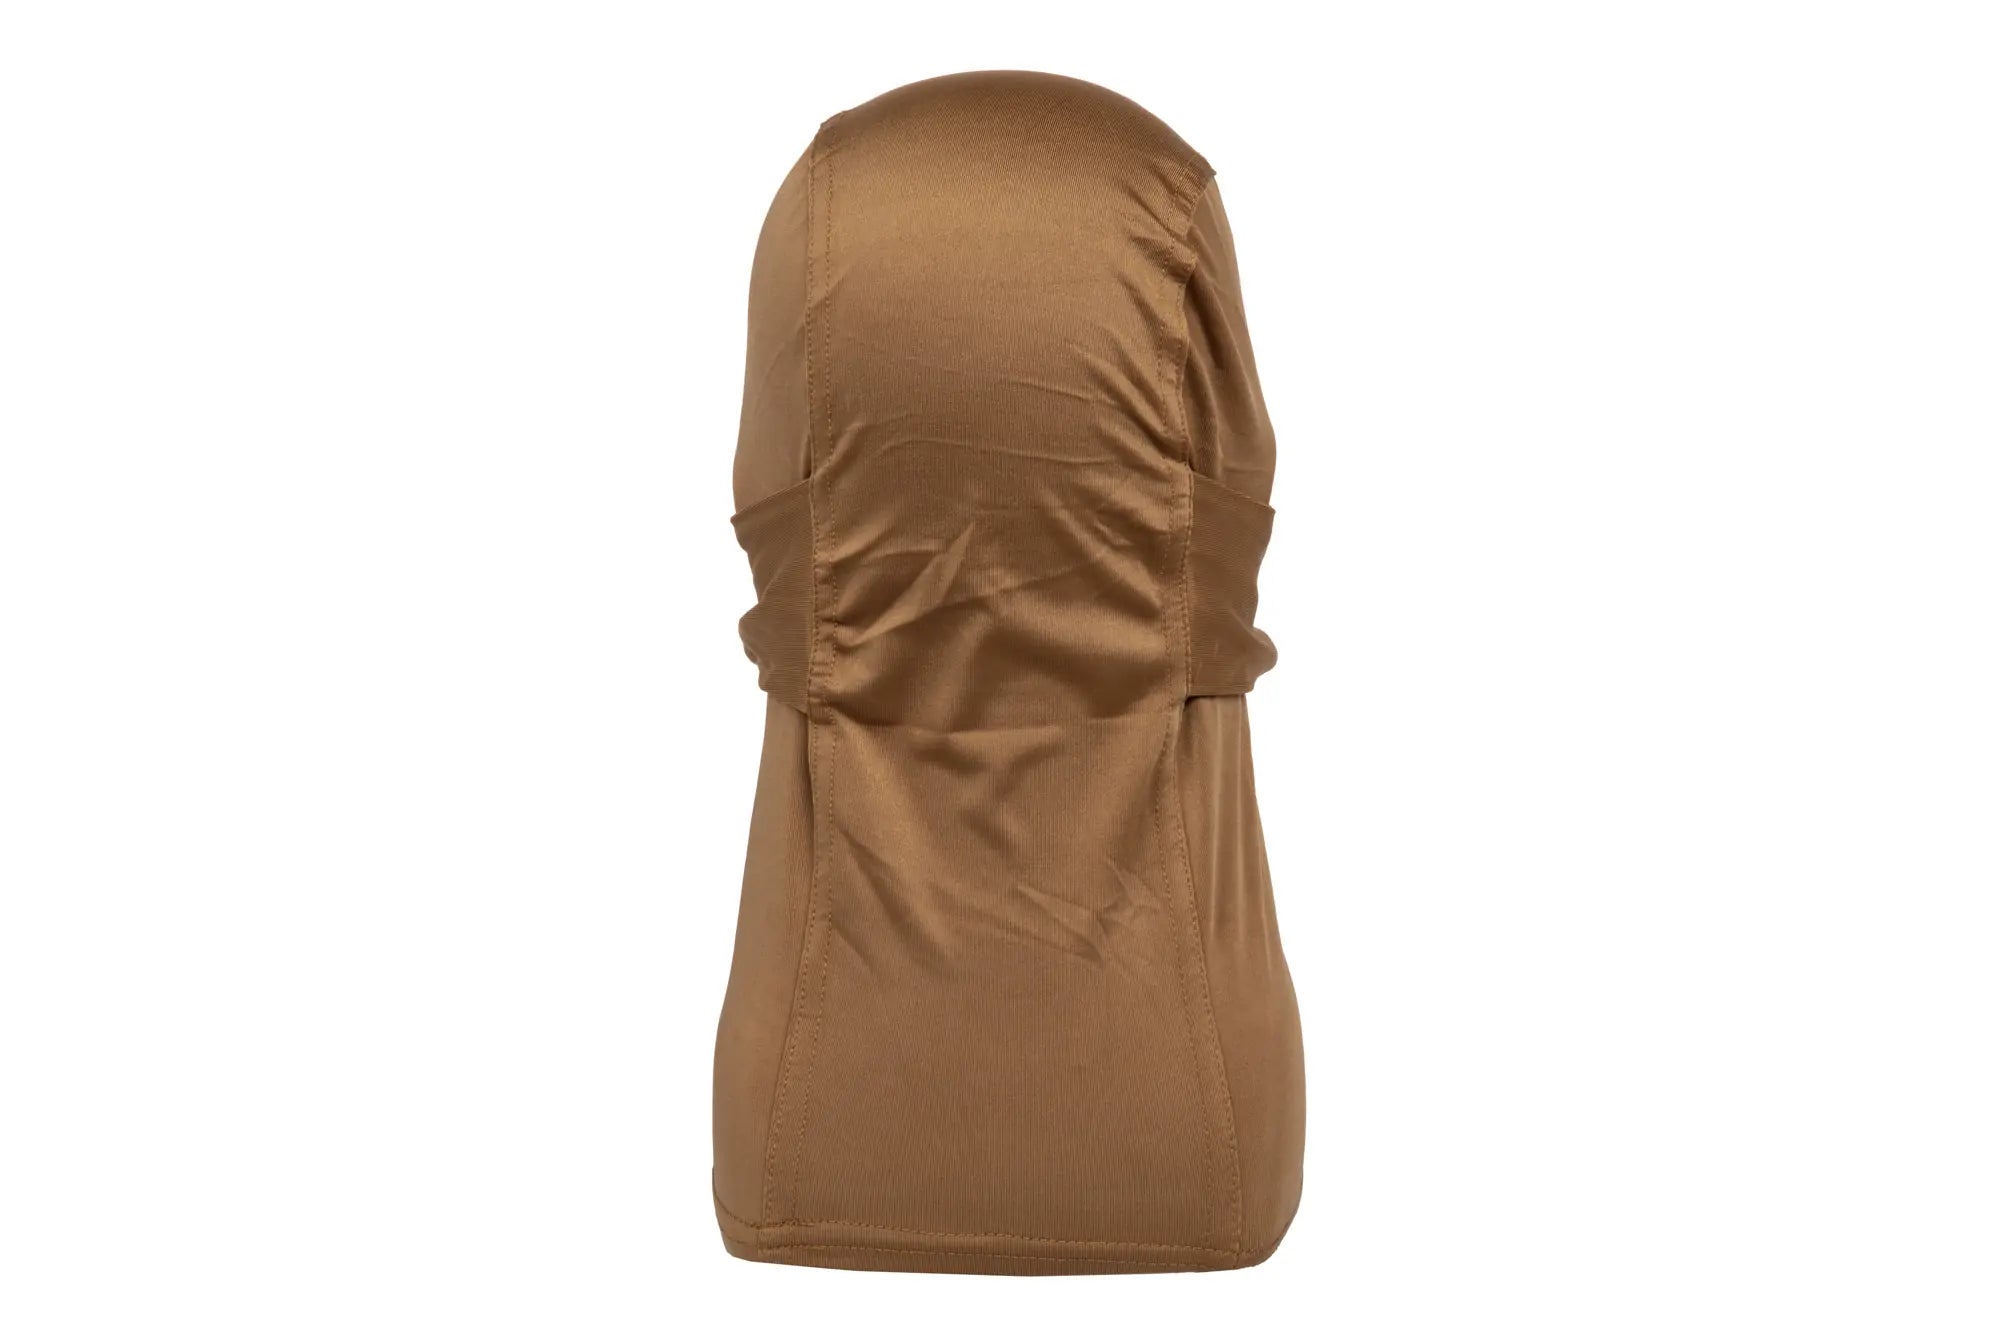 Mask with silicone protector Tan-4